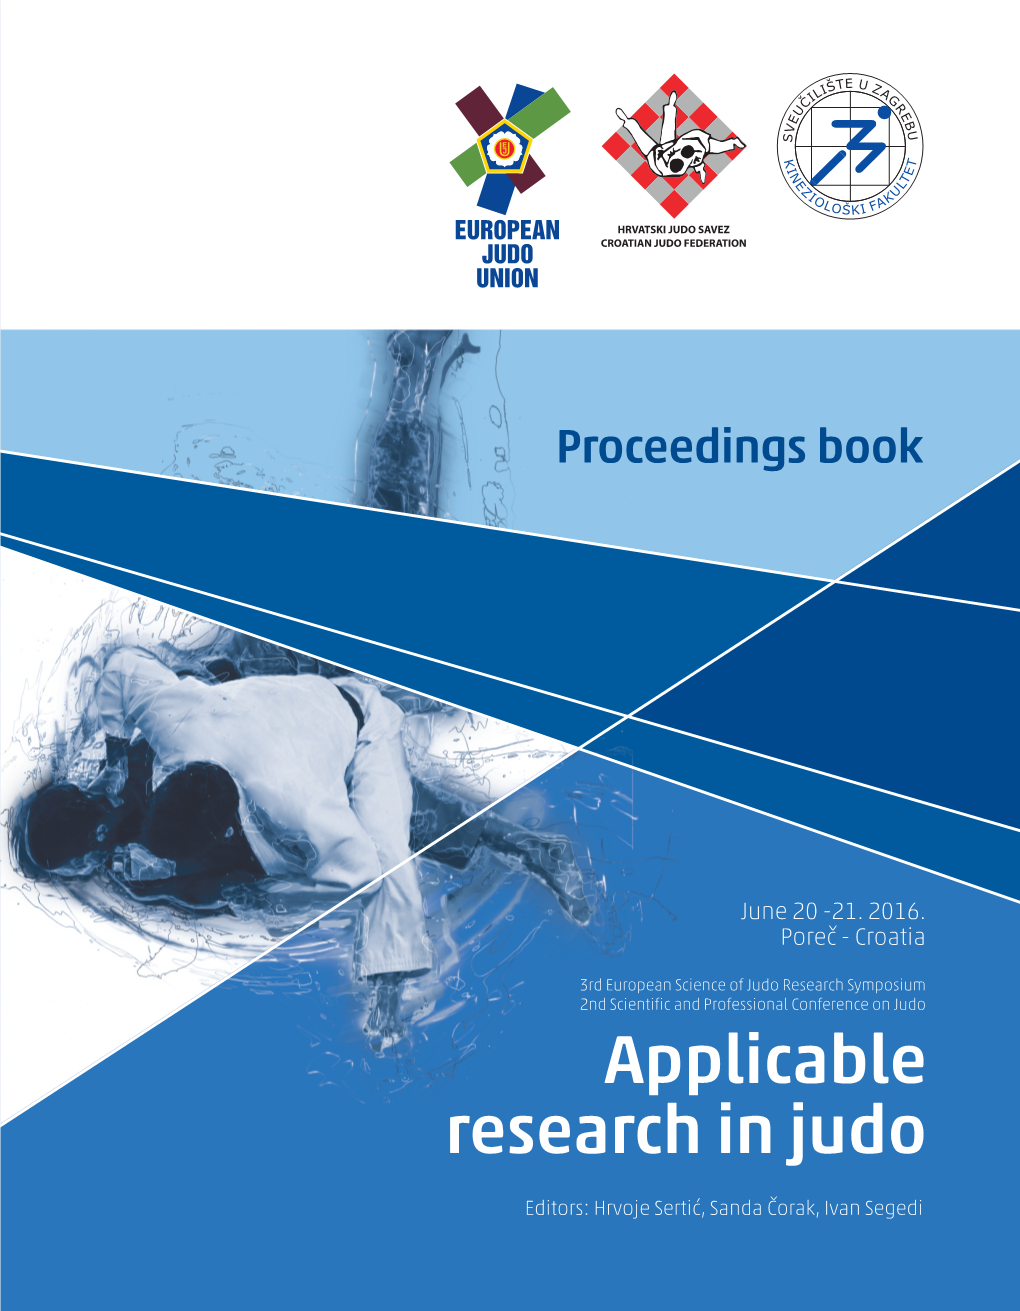 Applicable Research in Judo”